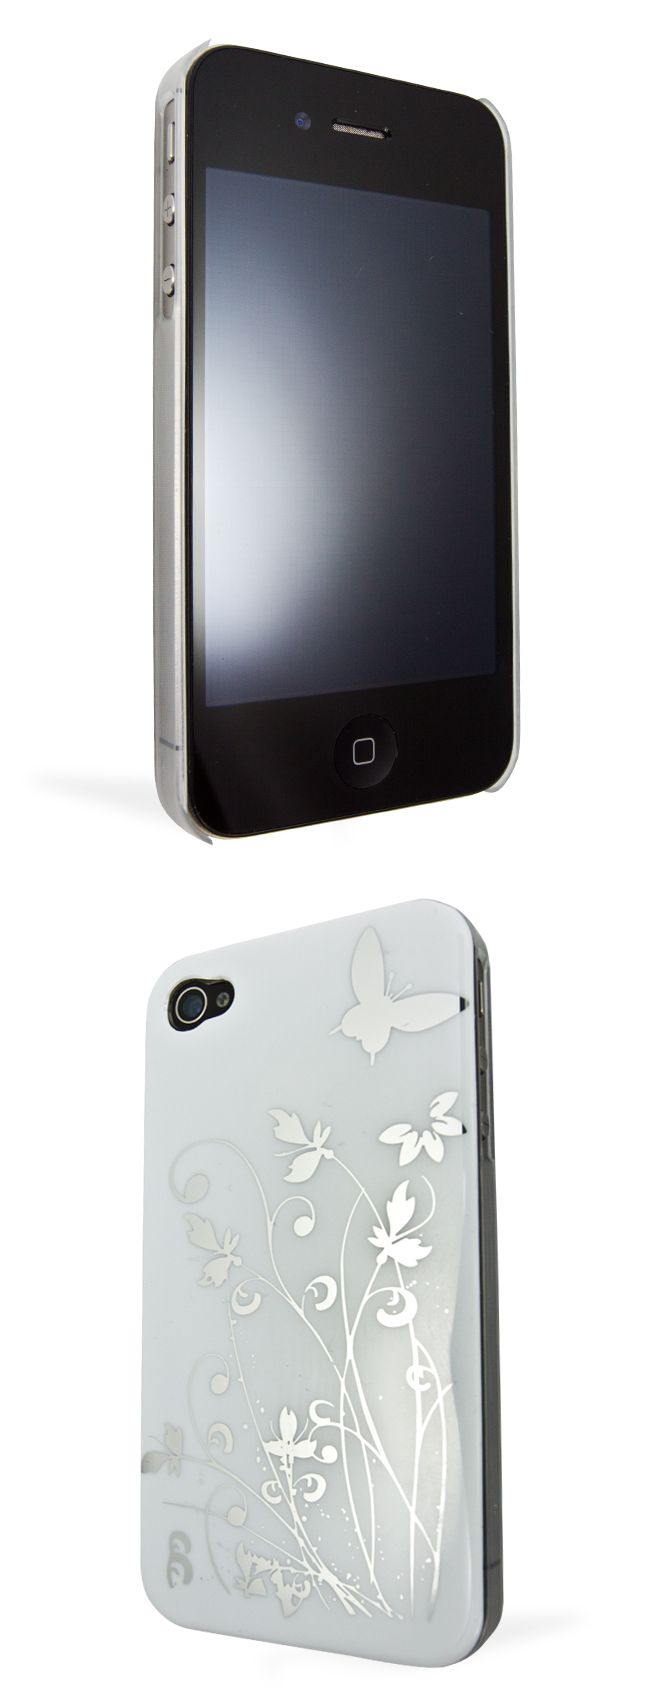   Butterfly Flower Cellphone Hard Case for iPhone 4 4S 4G Bumper